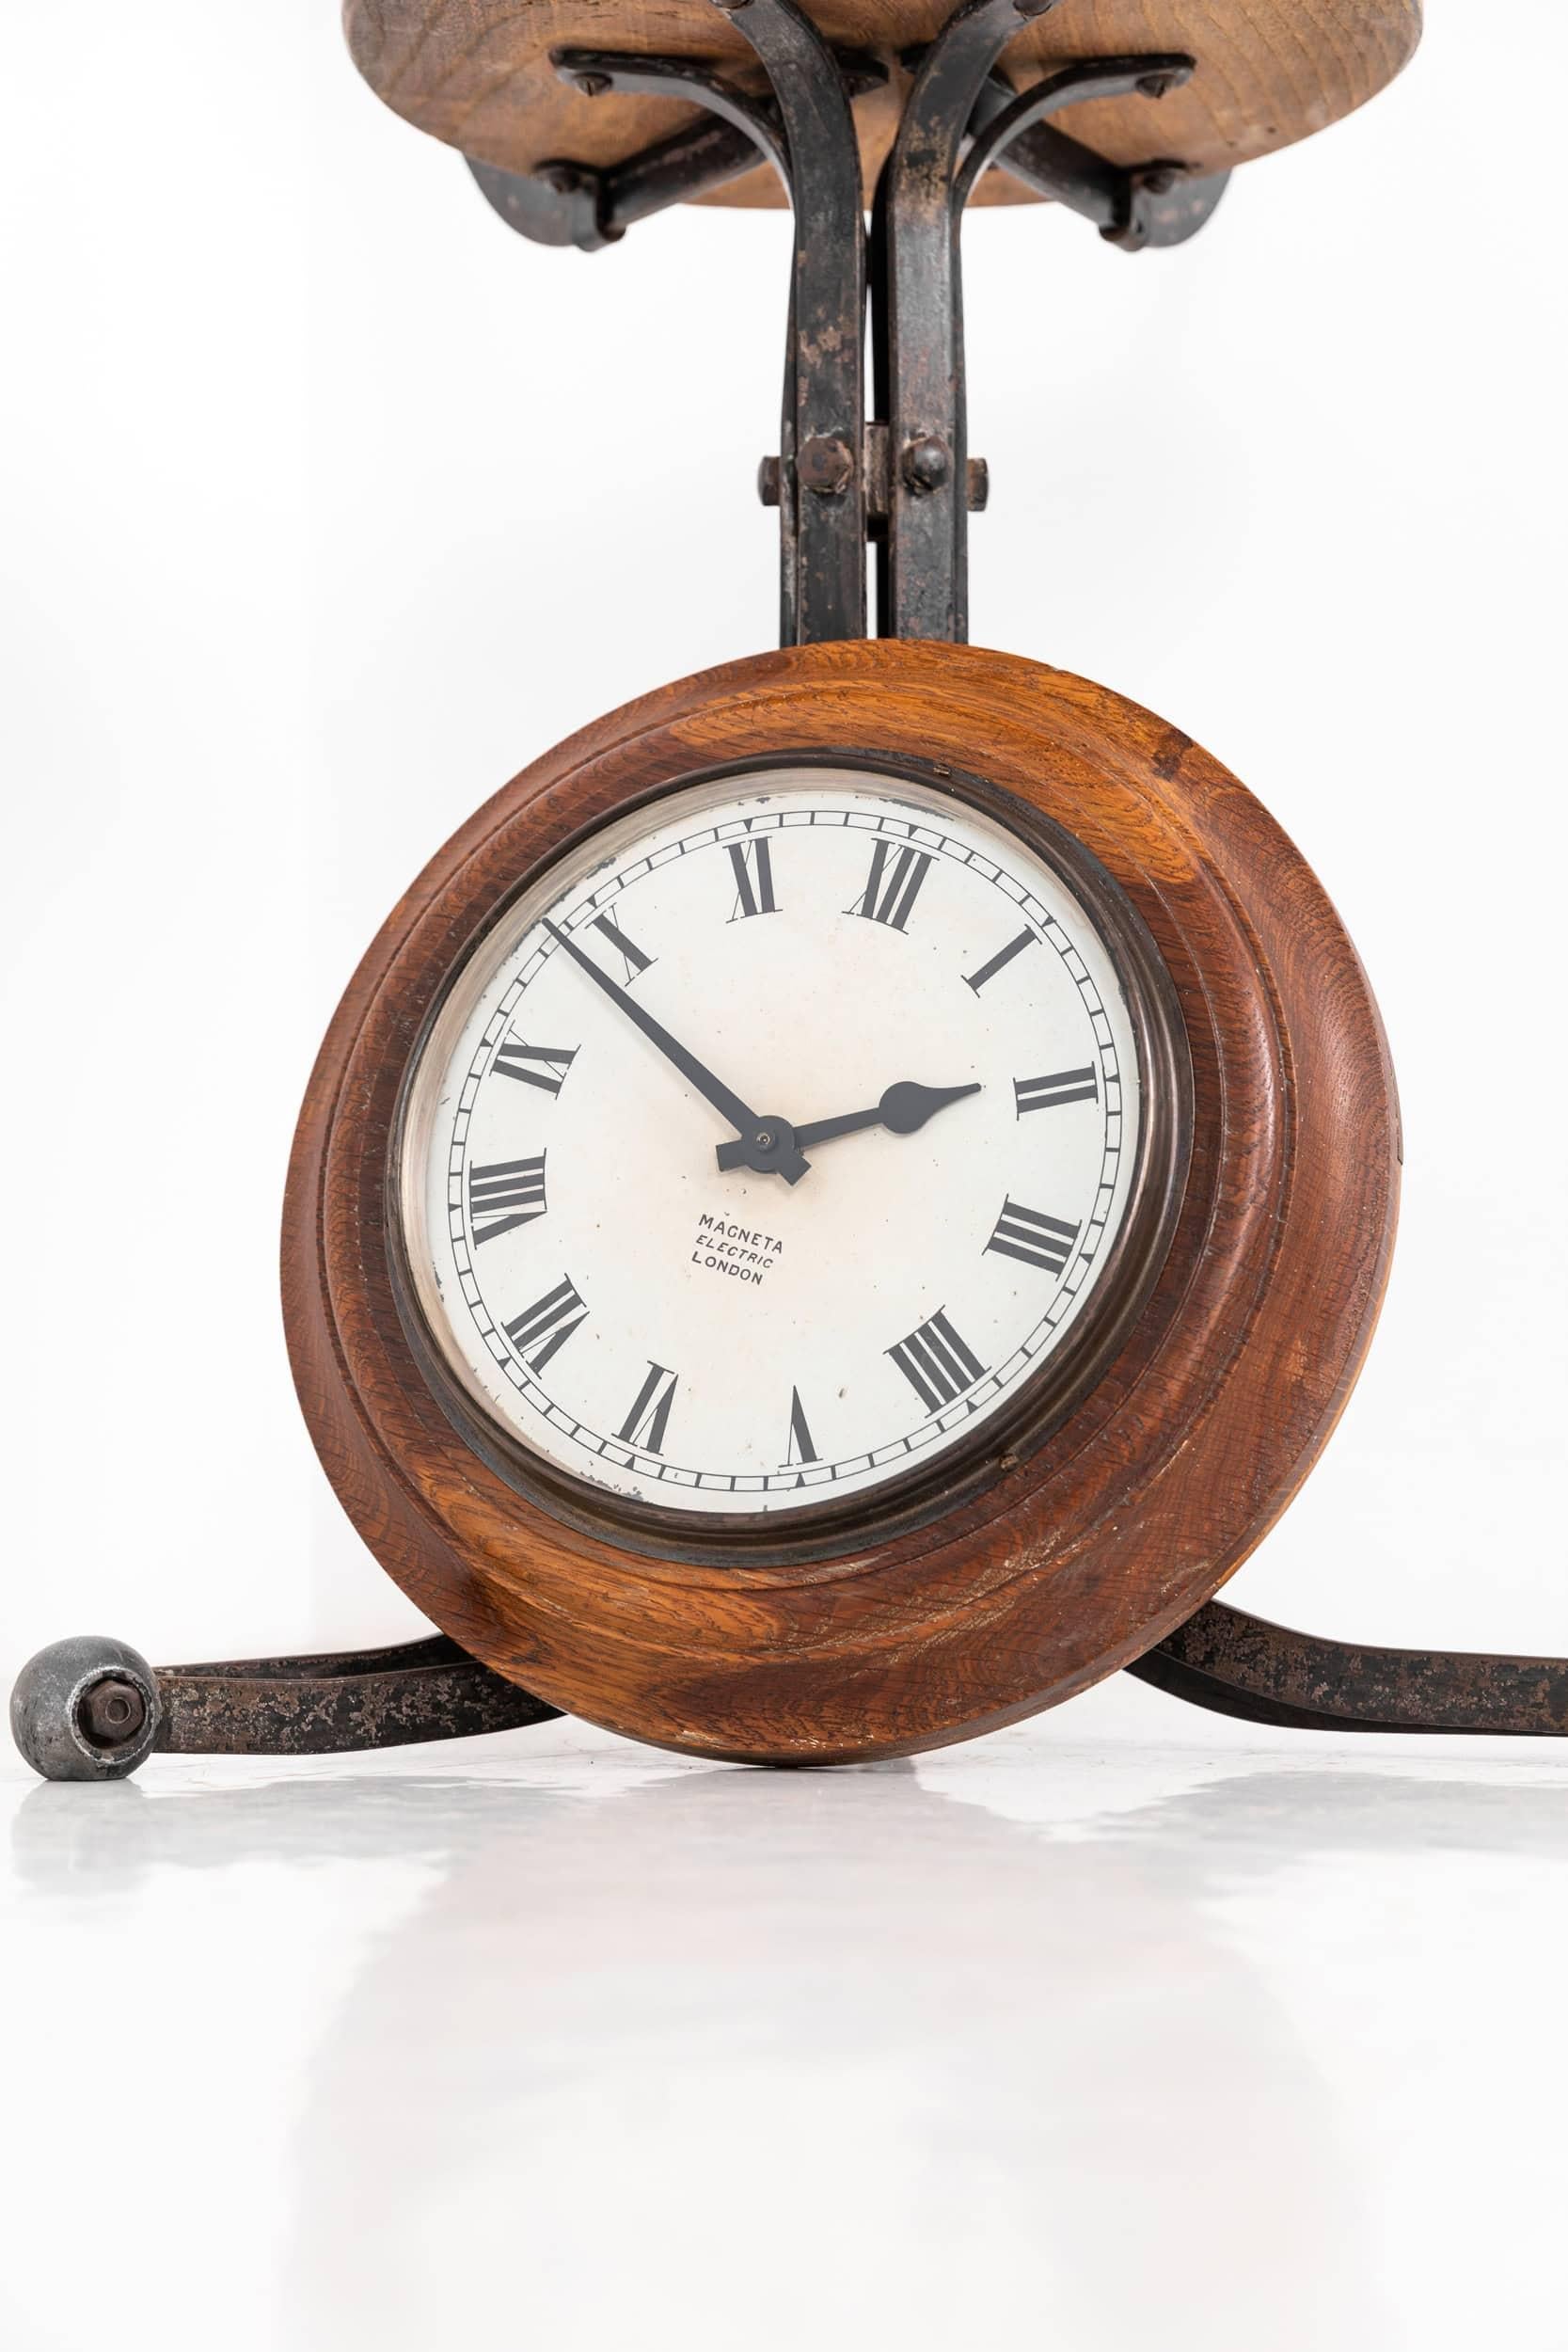 

A beautiful and diminutive wall clock made in England by Magneta Electric. c.1930

This lovely little clock has been left in original condition, with age related patina to the dial and hardwood case. Converted to a high torque Quartz movement for